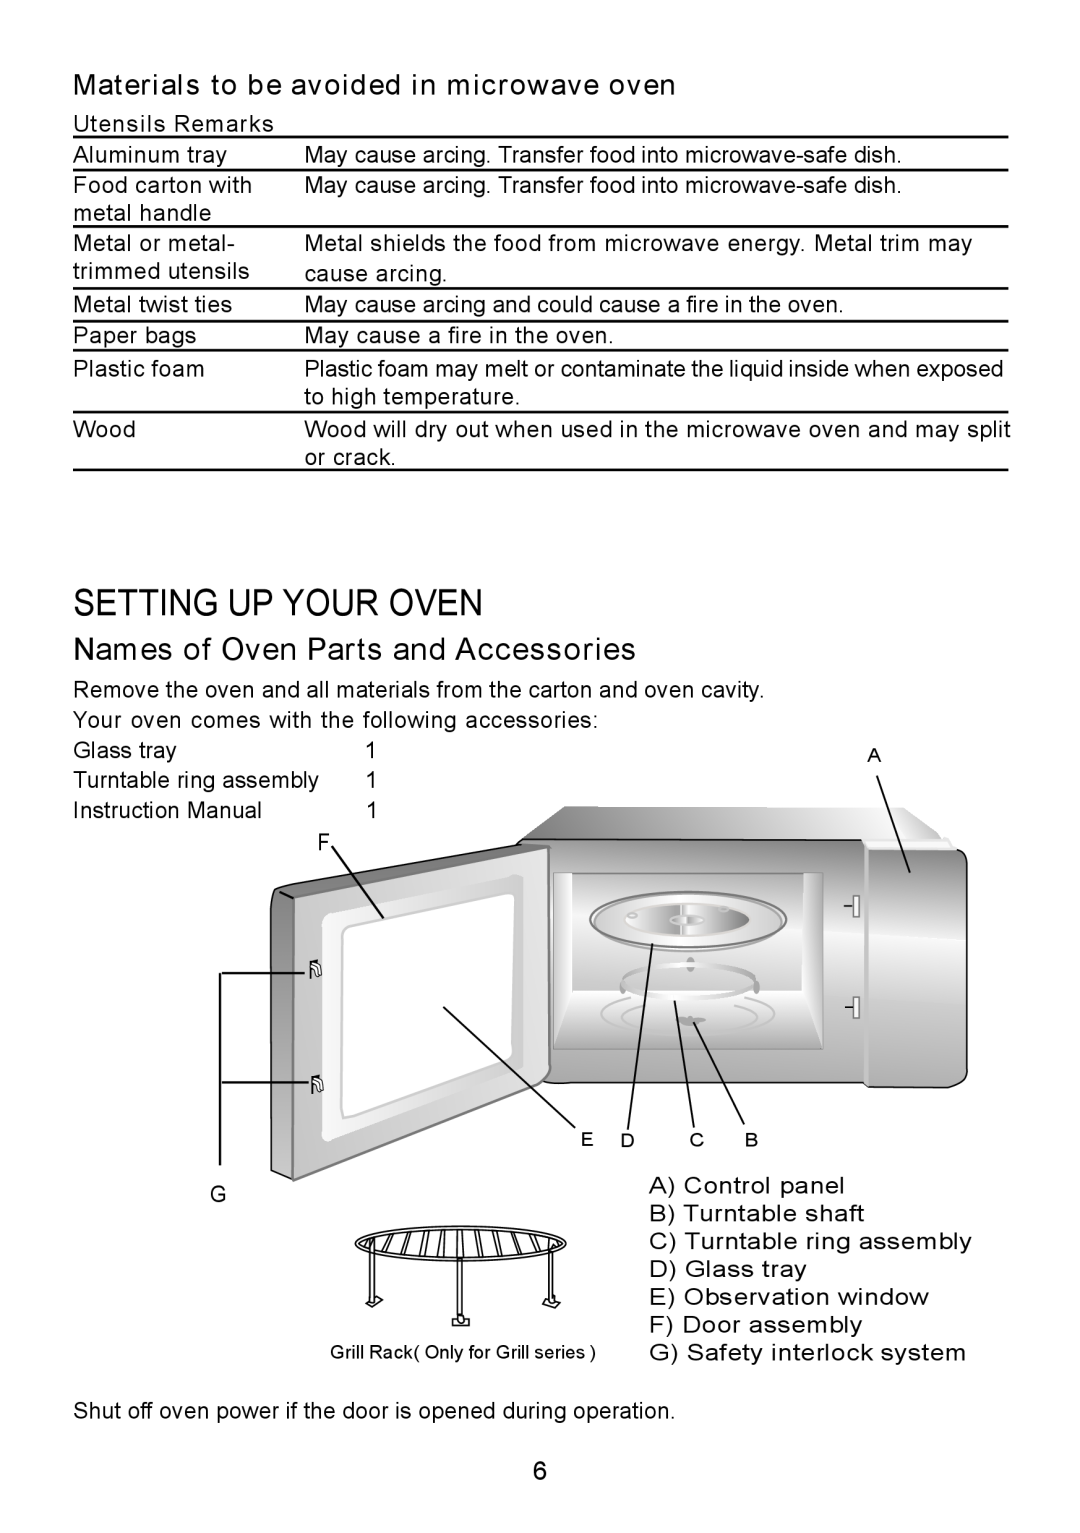 Sanyo em-c887B, UK2 Setting Up Your Oven, Names of Oven Parts and Accessories, Materials to be avoided in microwave oven 